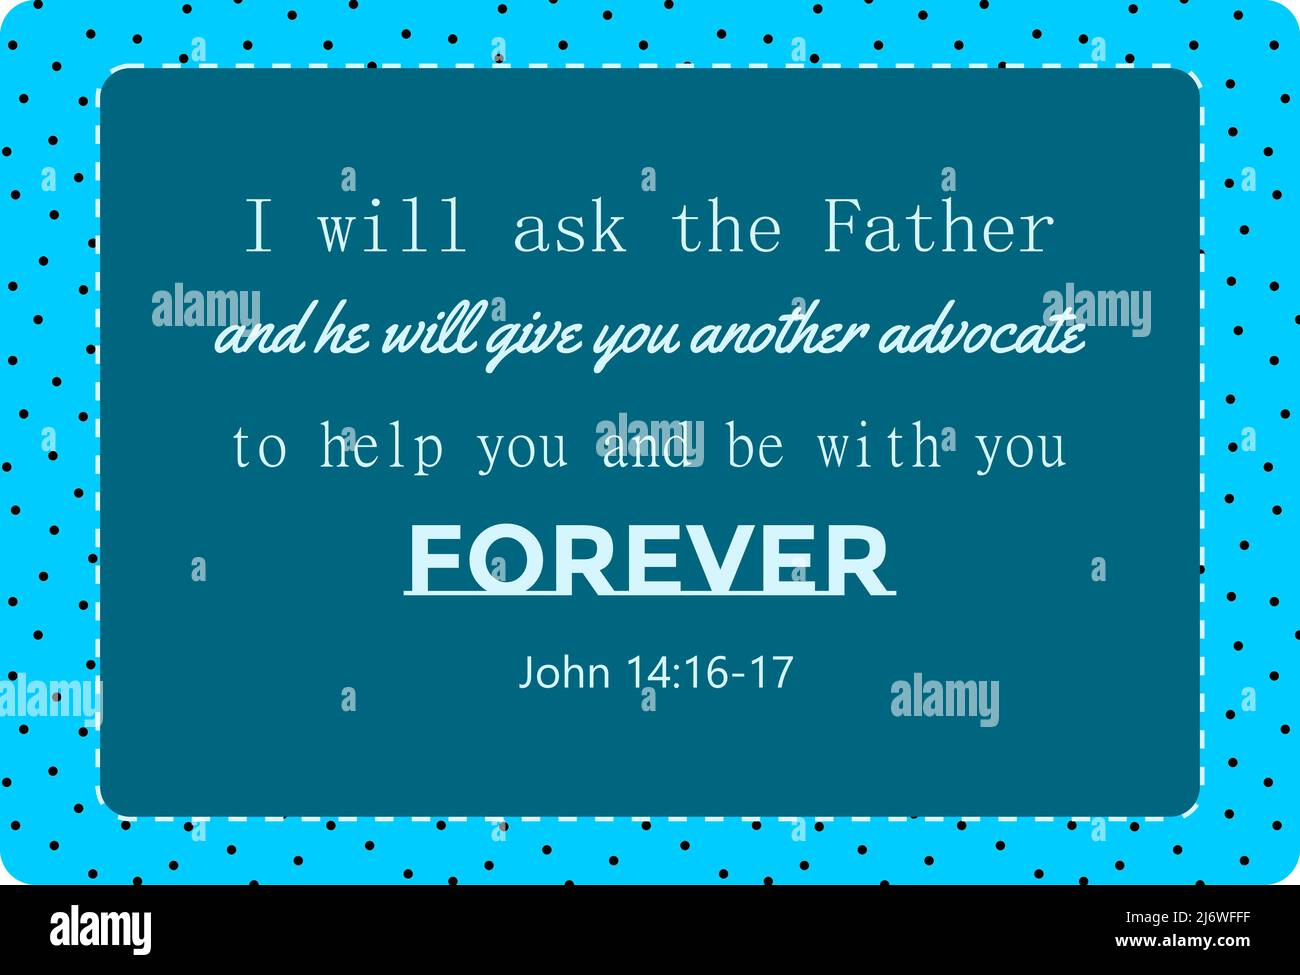 Vector: Bible text: I will ask the Father and he will give you another advocate to help you and be with you forever. John 14: 16-17. bible text for Pe Stock Vector